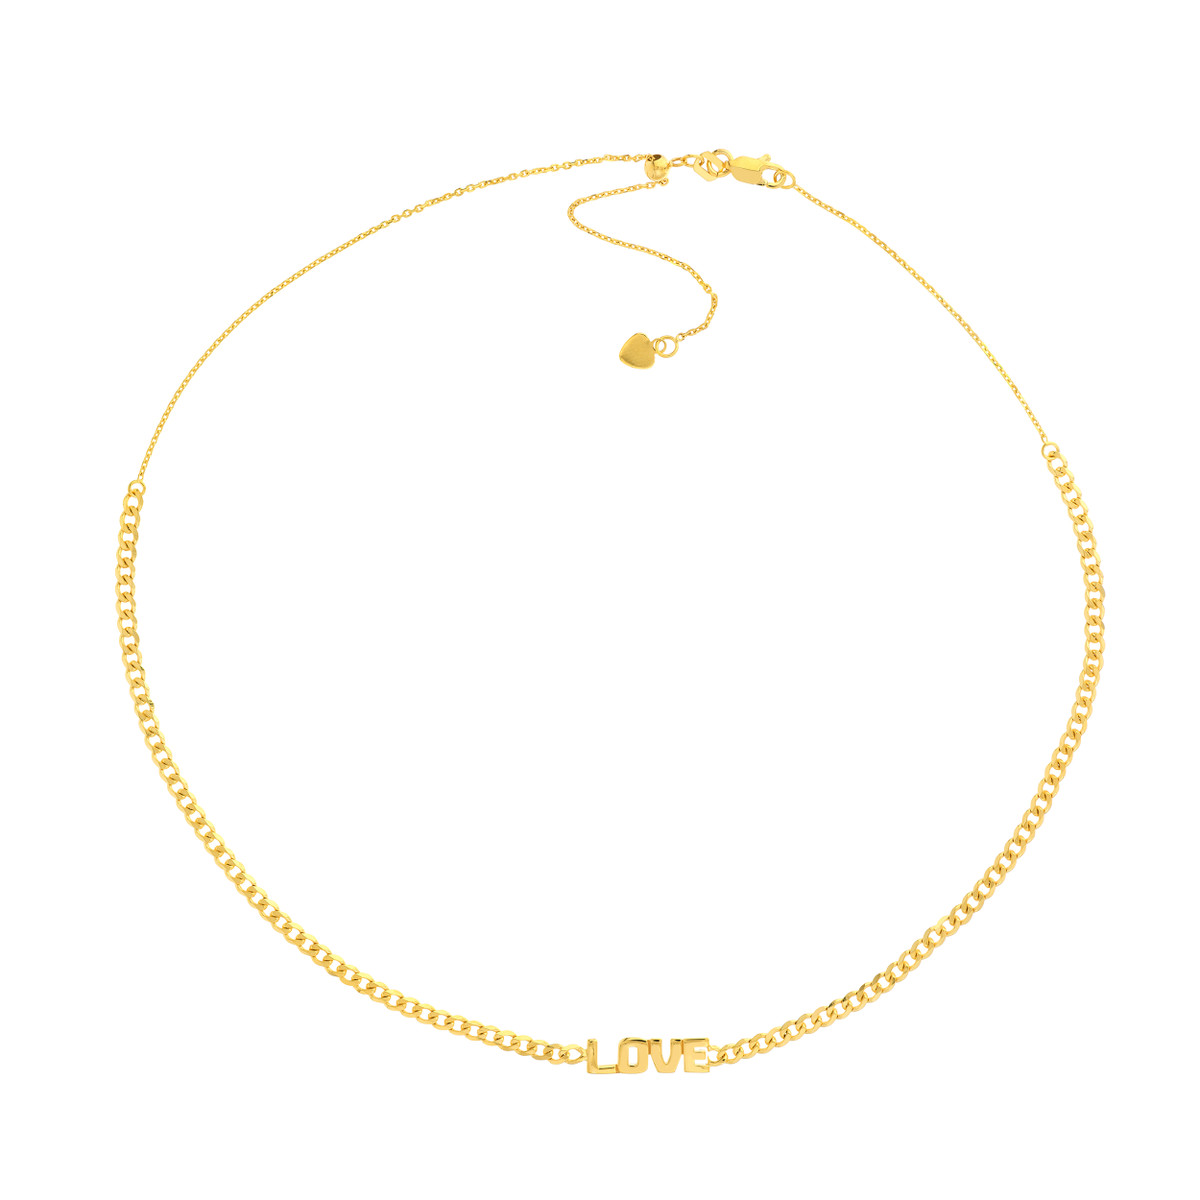 Hyde Park 14KT Yellow Gold Love Choker Necklace-26415 Product Image